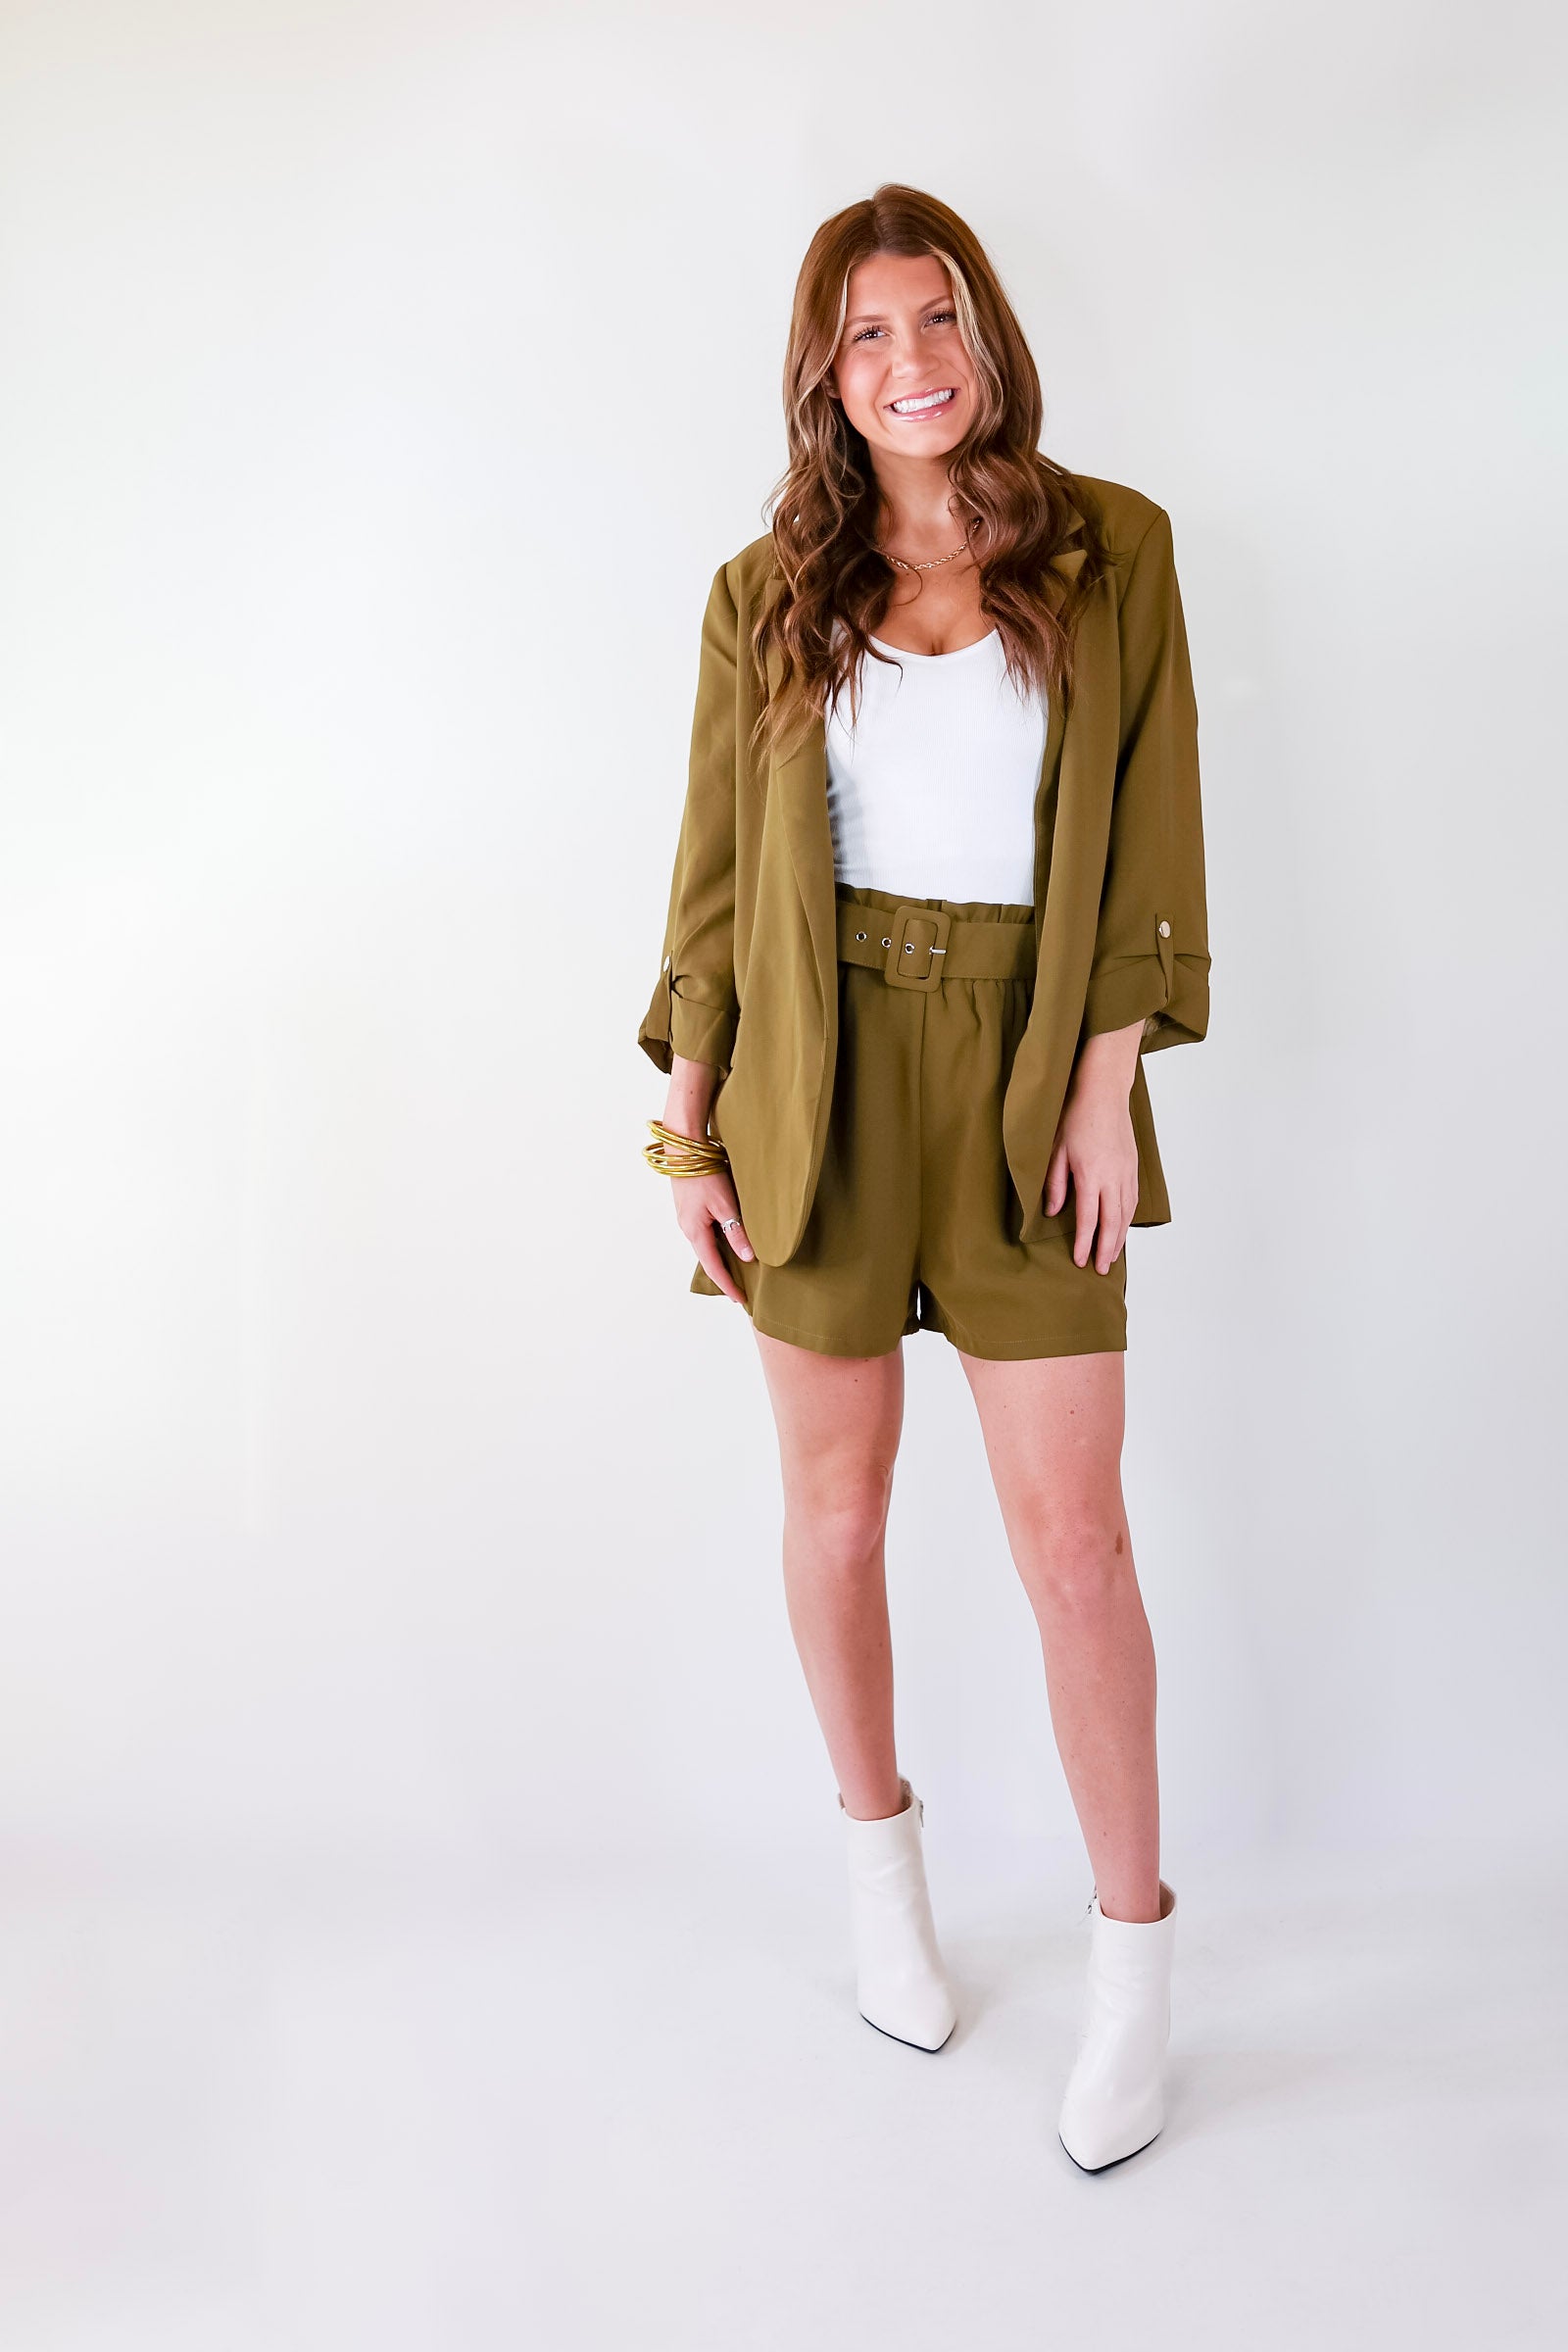 Fine Like Wine 3/4 Sleeve Blazer in Olive Green - Giddy Up Glamour Boutique